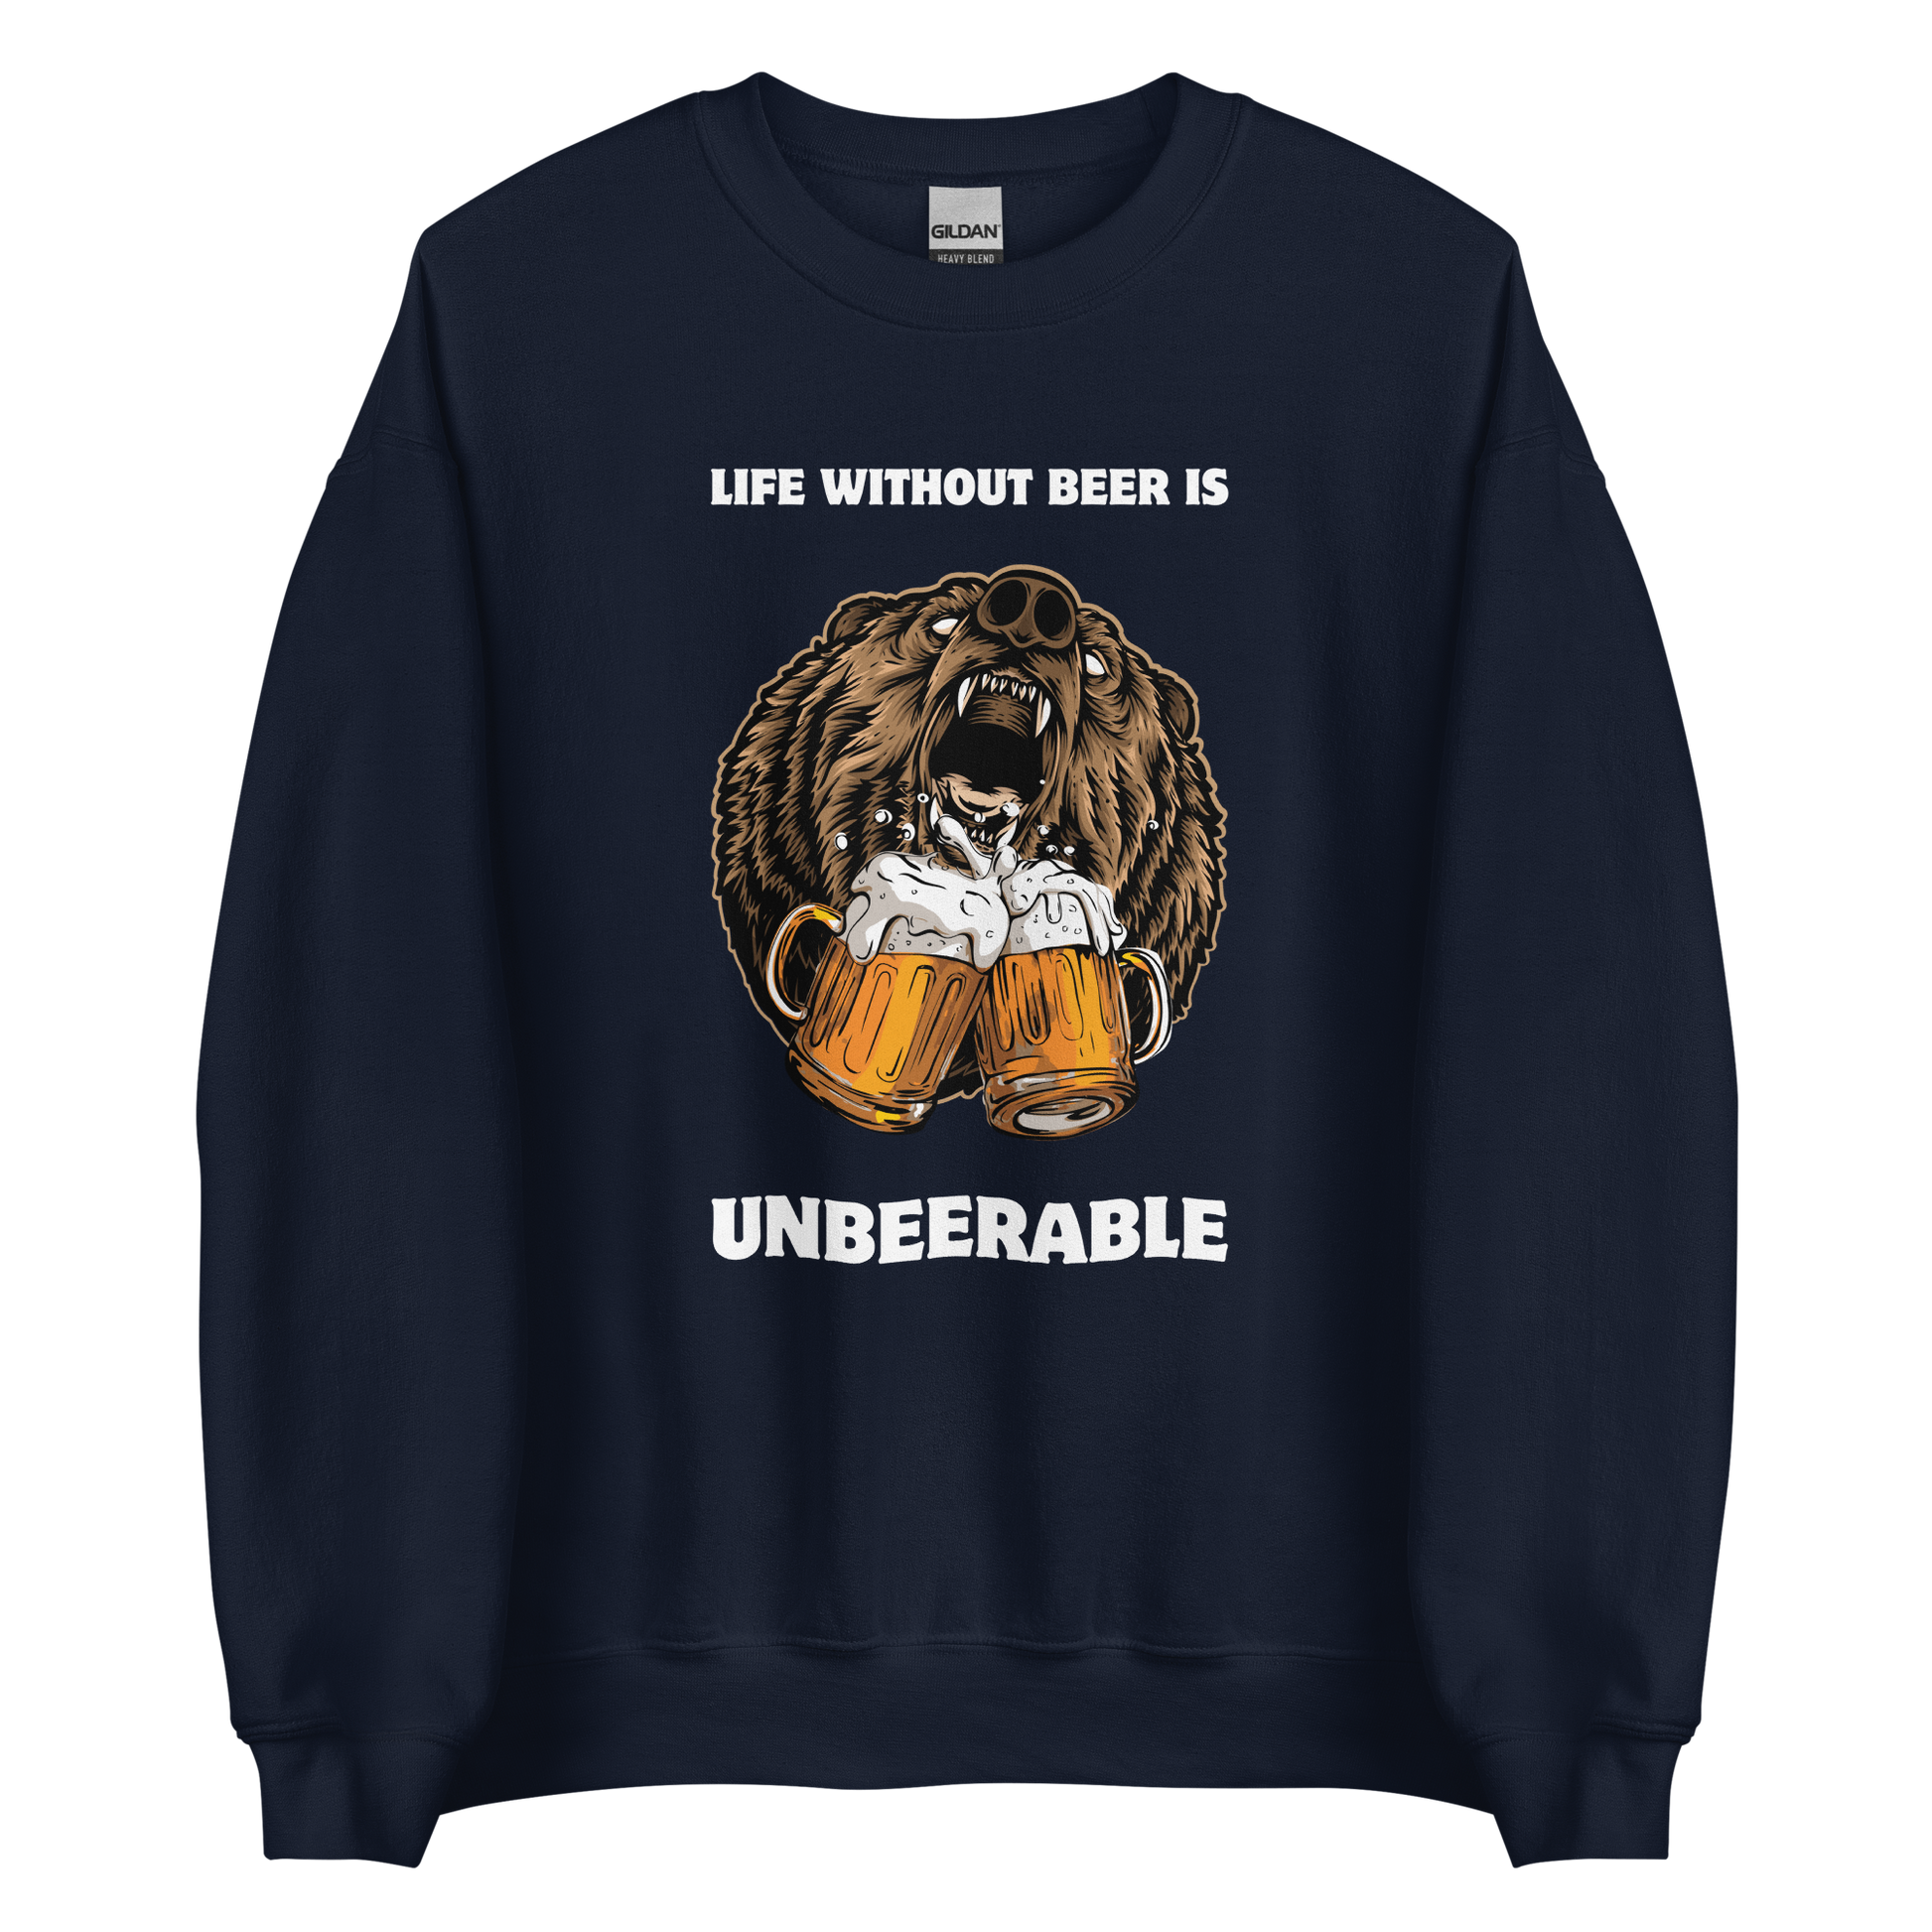 Navy Bear Sweatshirt featuring a Life Without Beer Is Unbeerable graphic on the chest - Funny Graphic Bear Sweatshirts - Boozy Fox